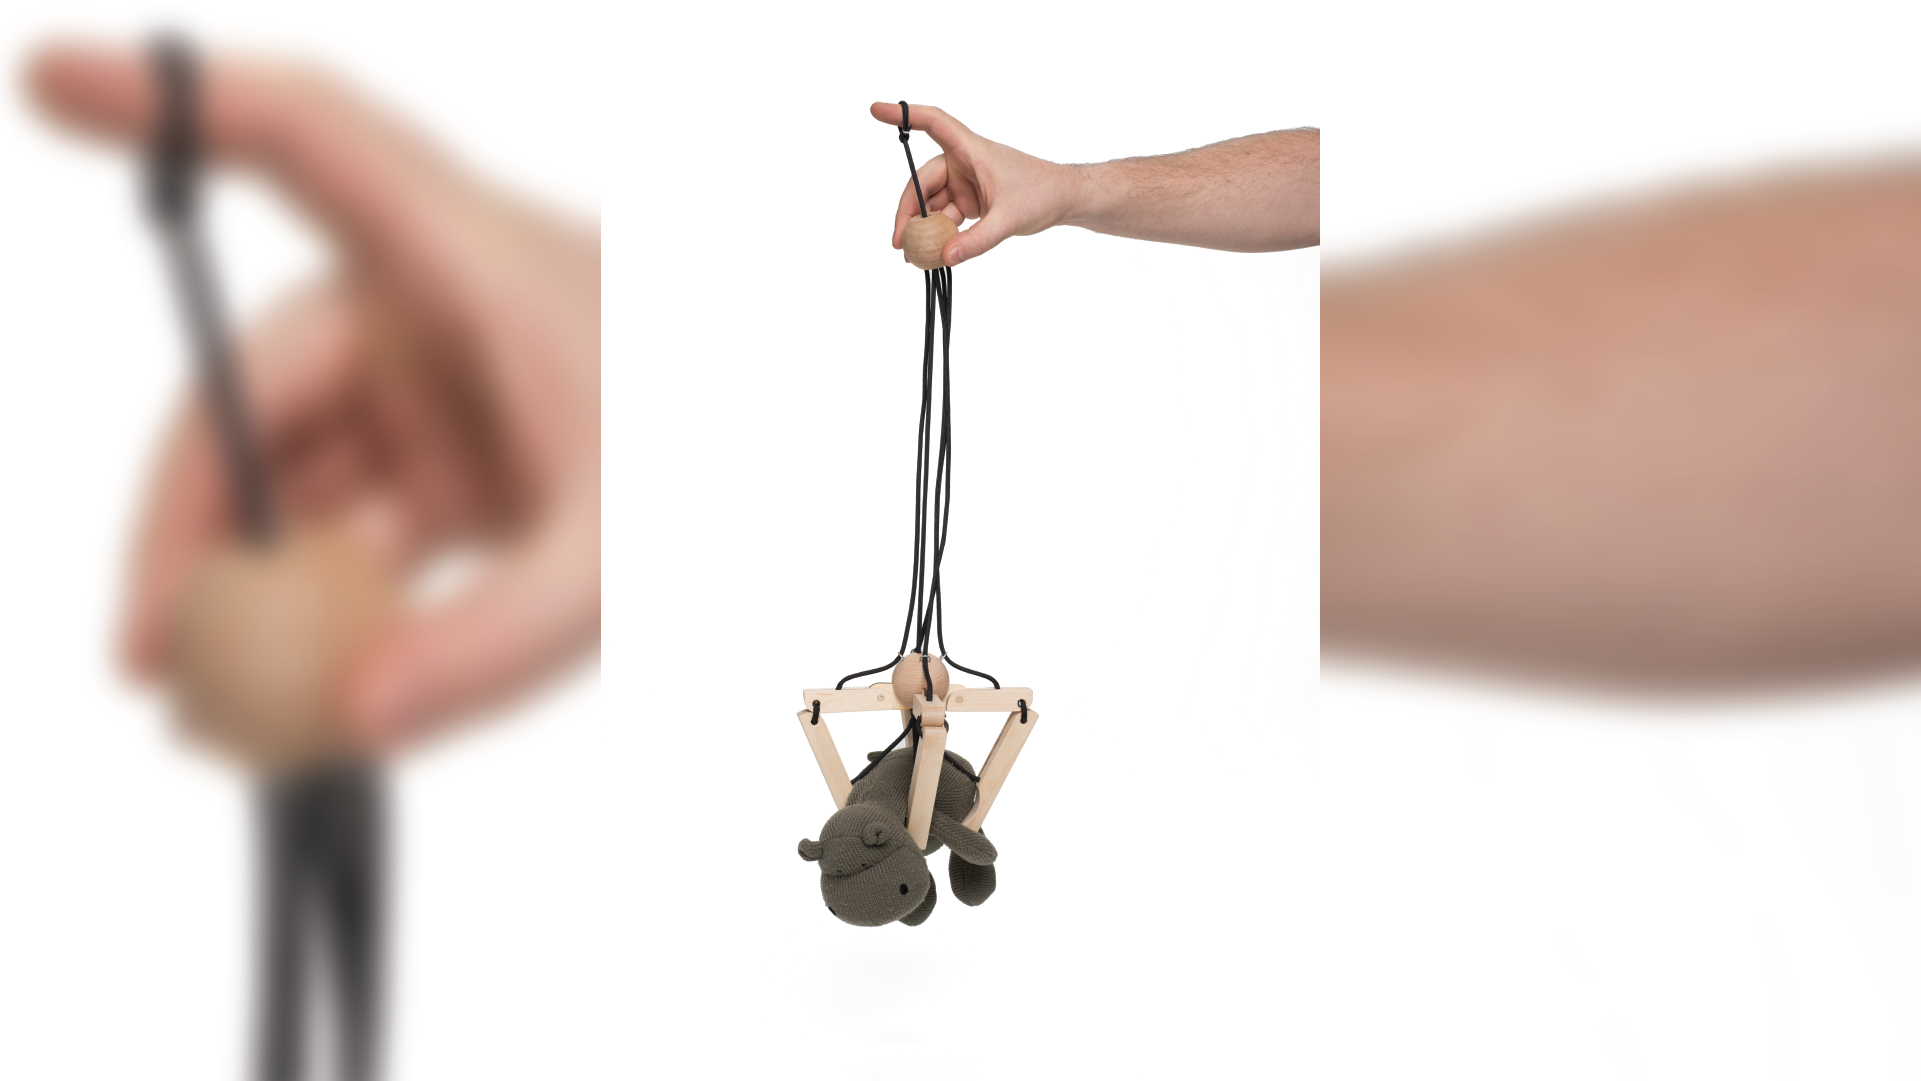 Hand holding the wooden handle and pulling the strings to capture a stuffed animal.